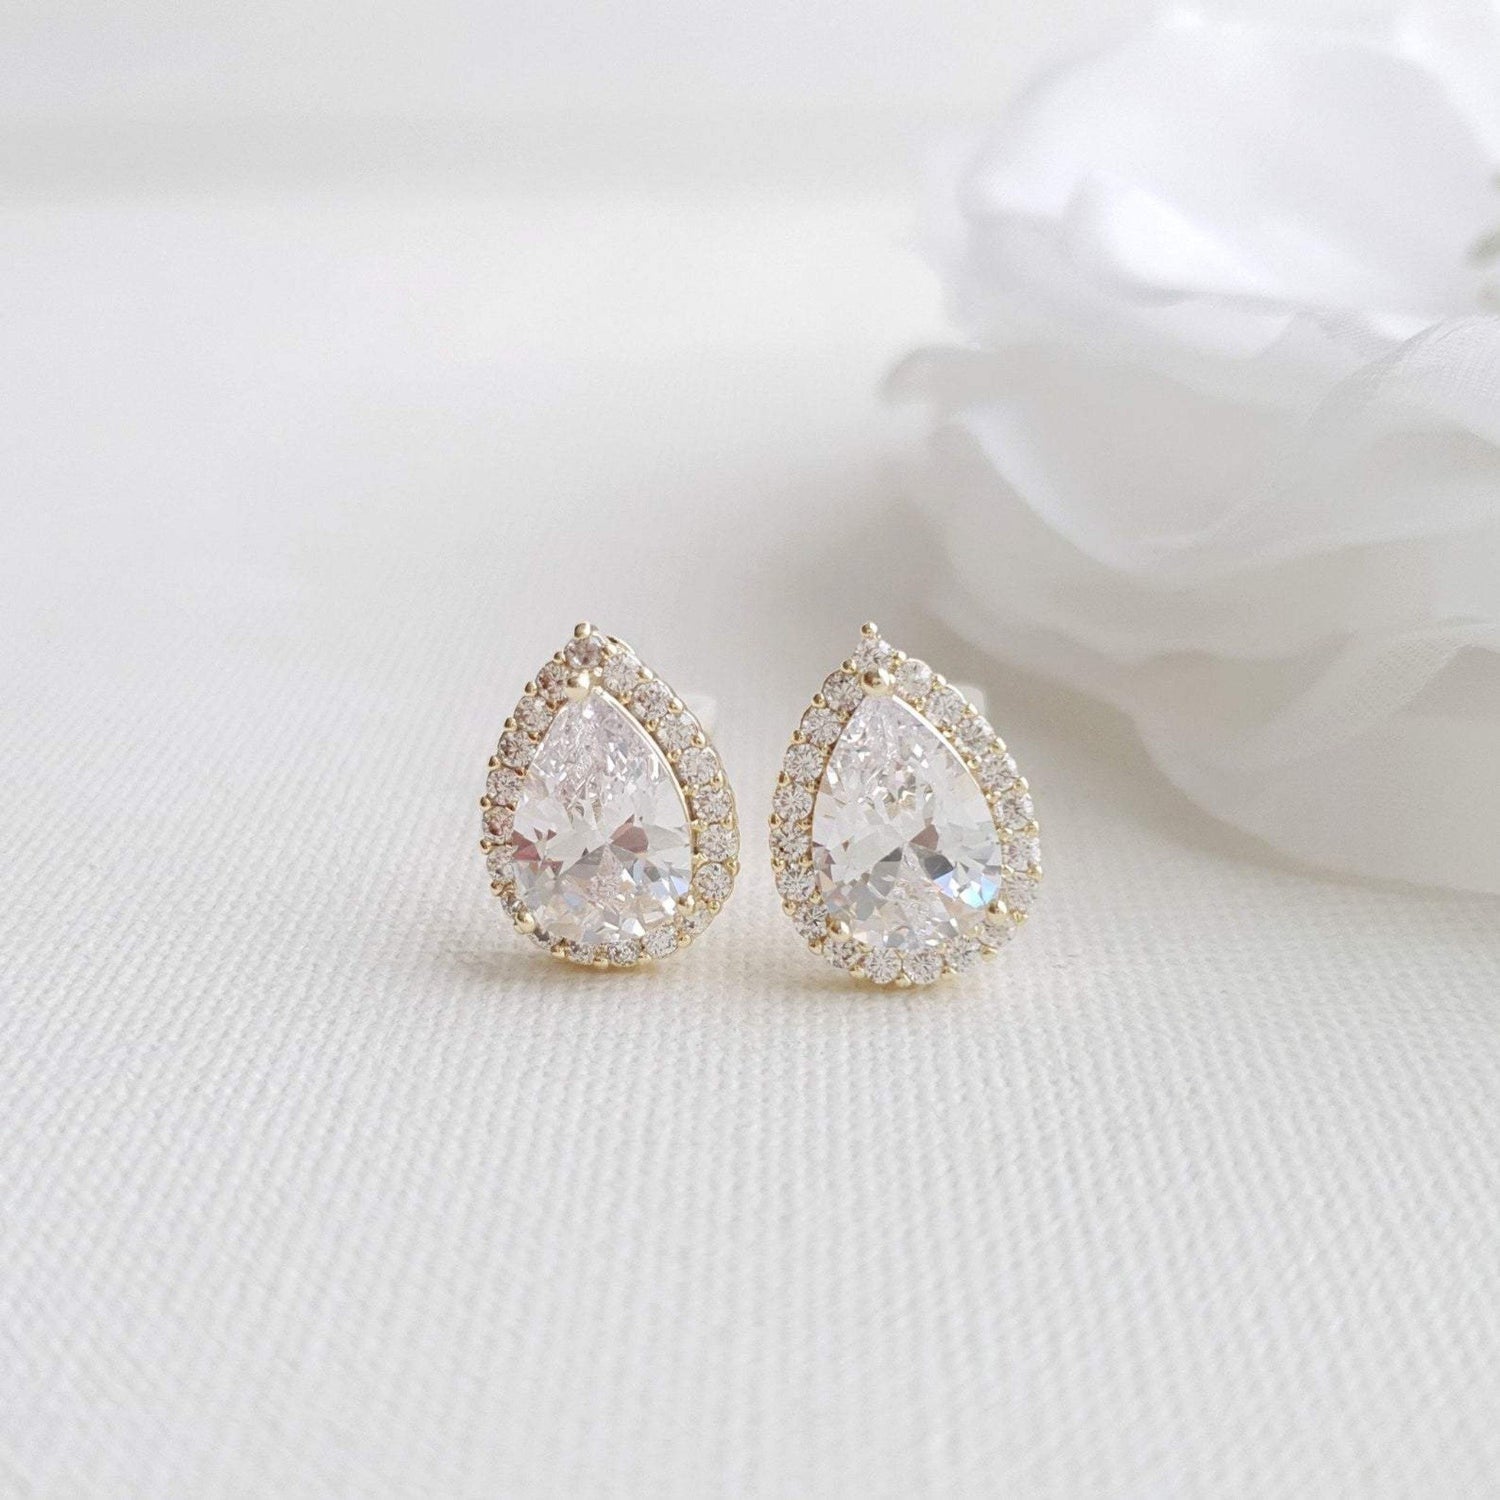 14K gold Teardrop Shaped Clip On stud earrings for Brides and Weddings